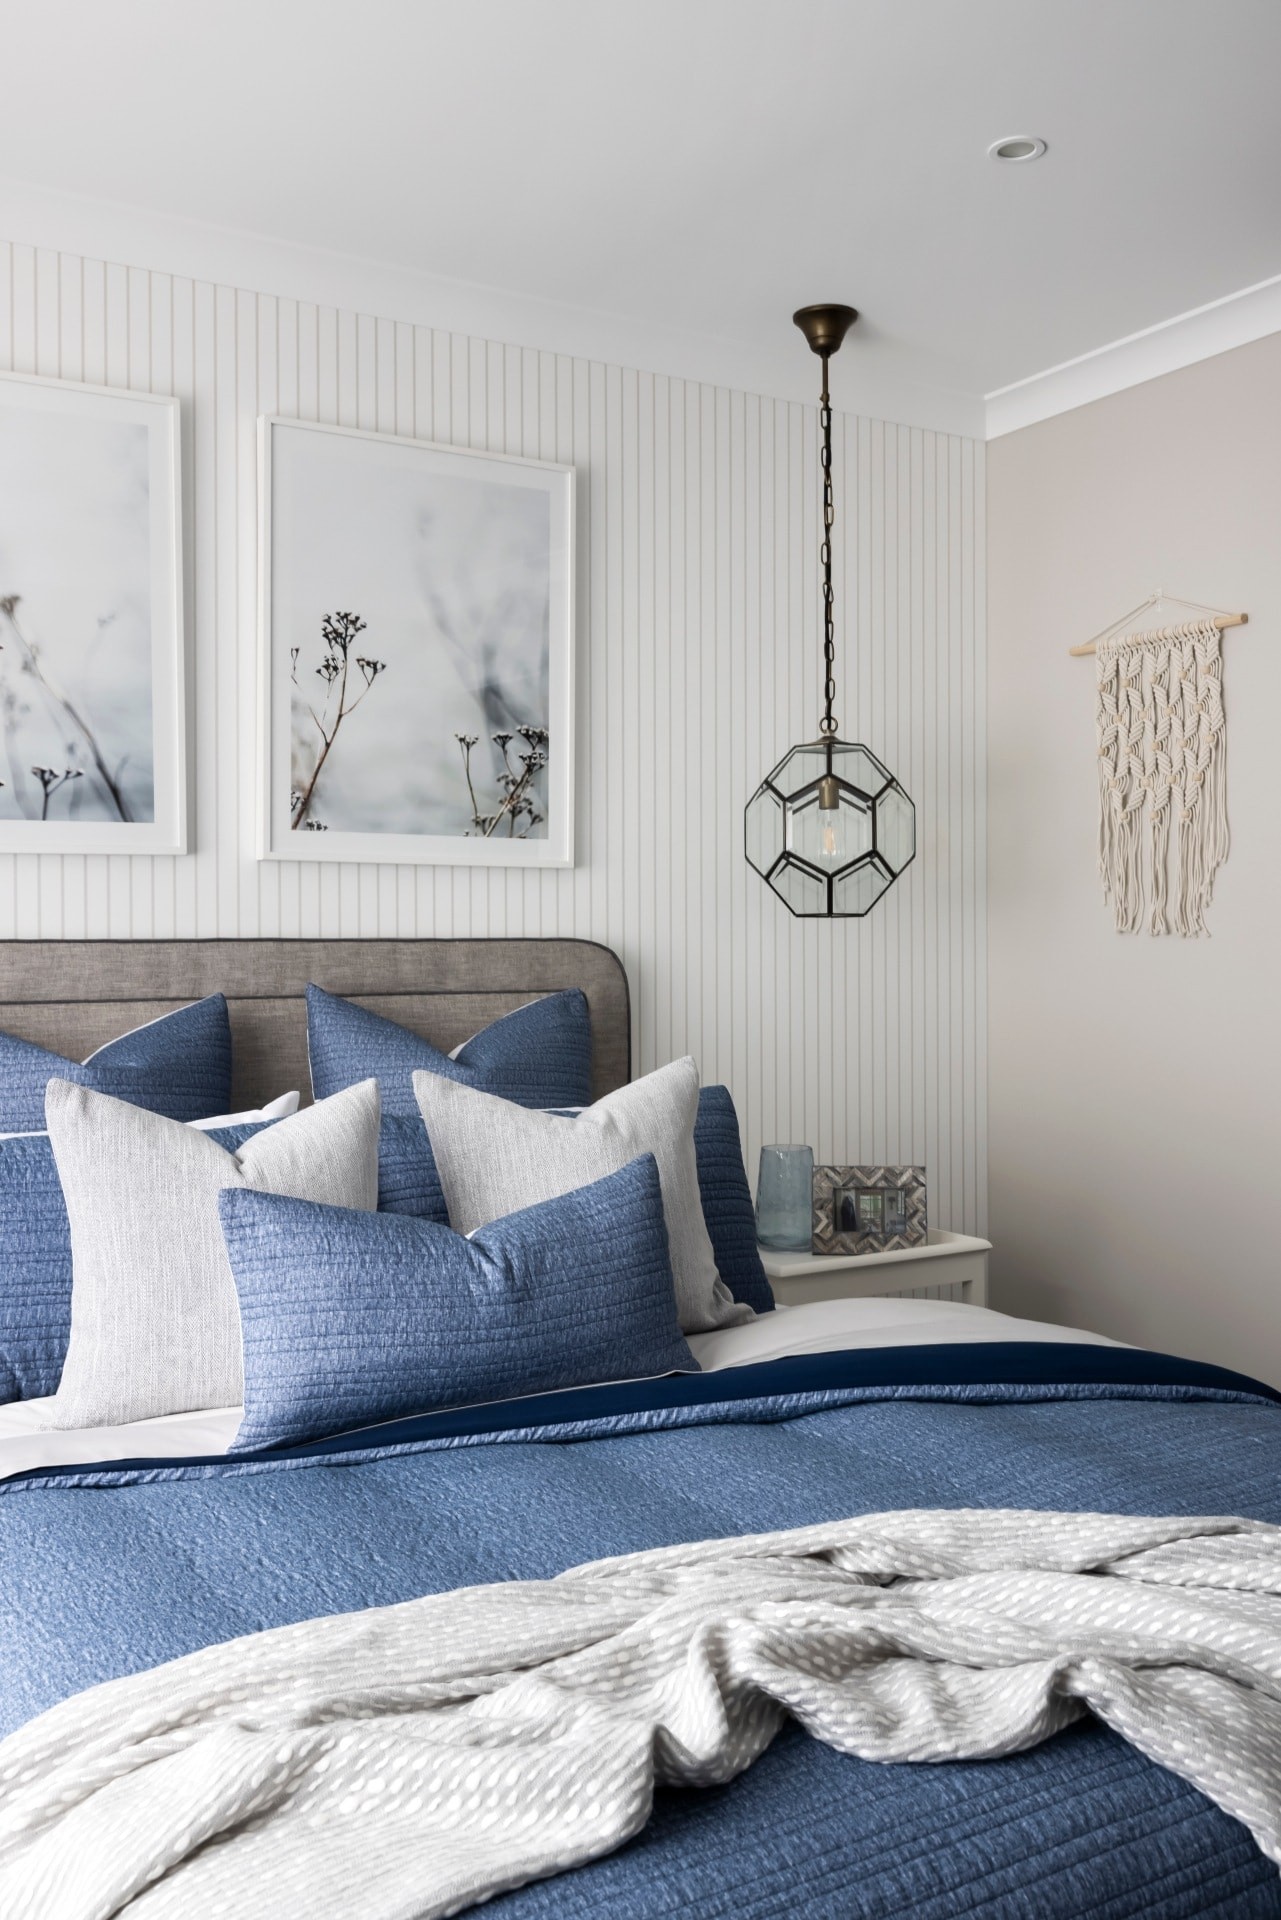 hamptons bedroom design ideas soft blue quilt cover set on bed with industrial metal and glass pendant lights